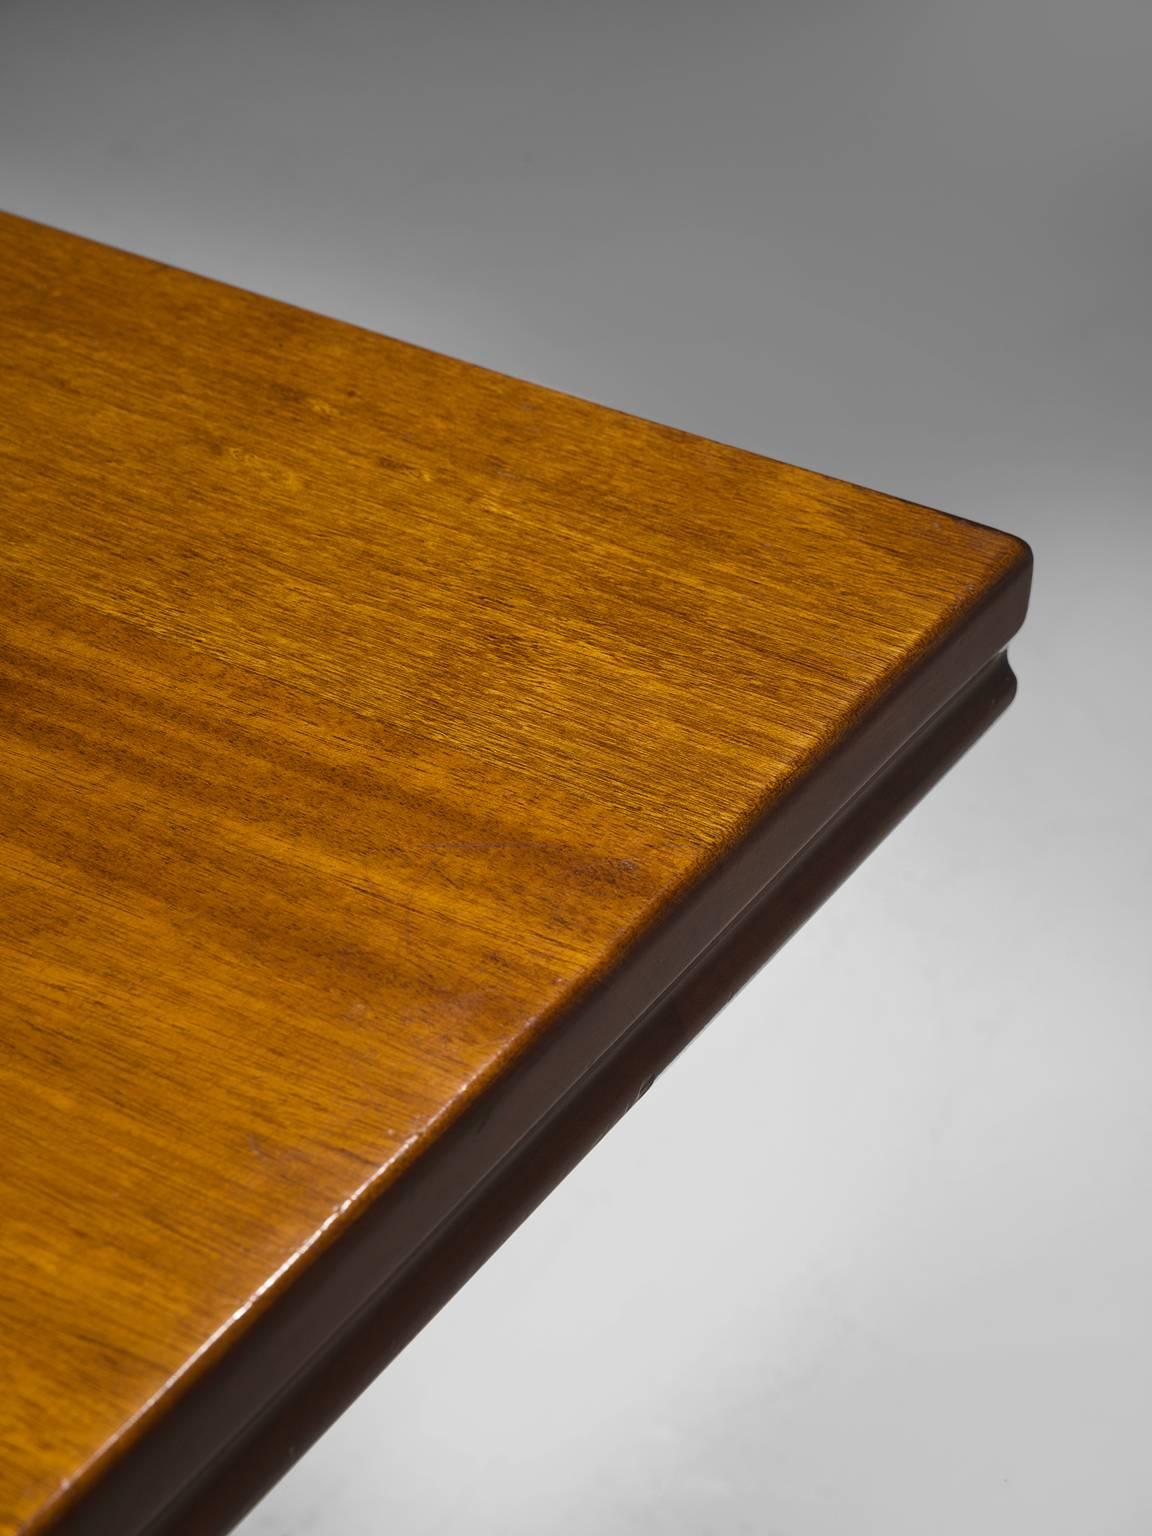 Dining table, in mahogany, Italy, 1940s

Large architectural table in patinated mahogany. The rectangular tabletop features detailed edges. The base of this table is made out of two curved ribbed legs. The slightly curved columns are decorated